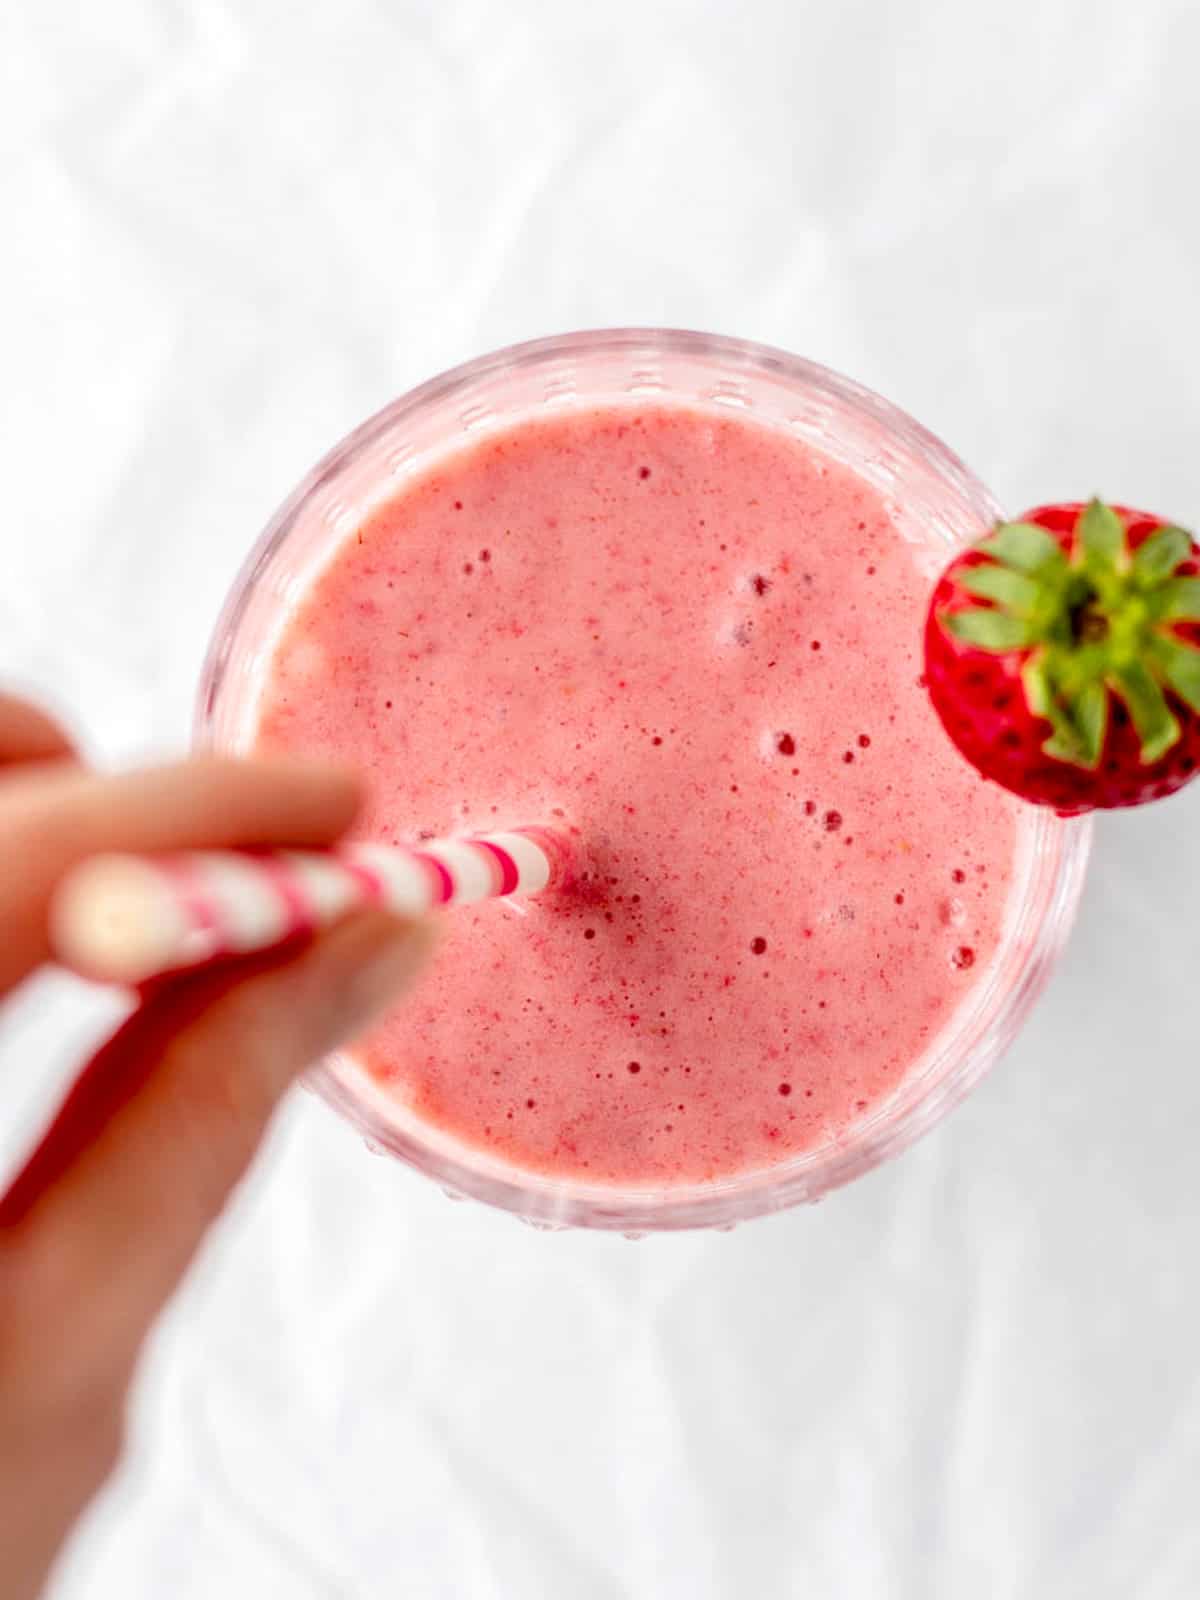 A hand holding the straw in a glass of healthy strawberry banana smoothie.